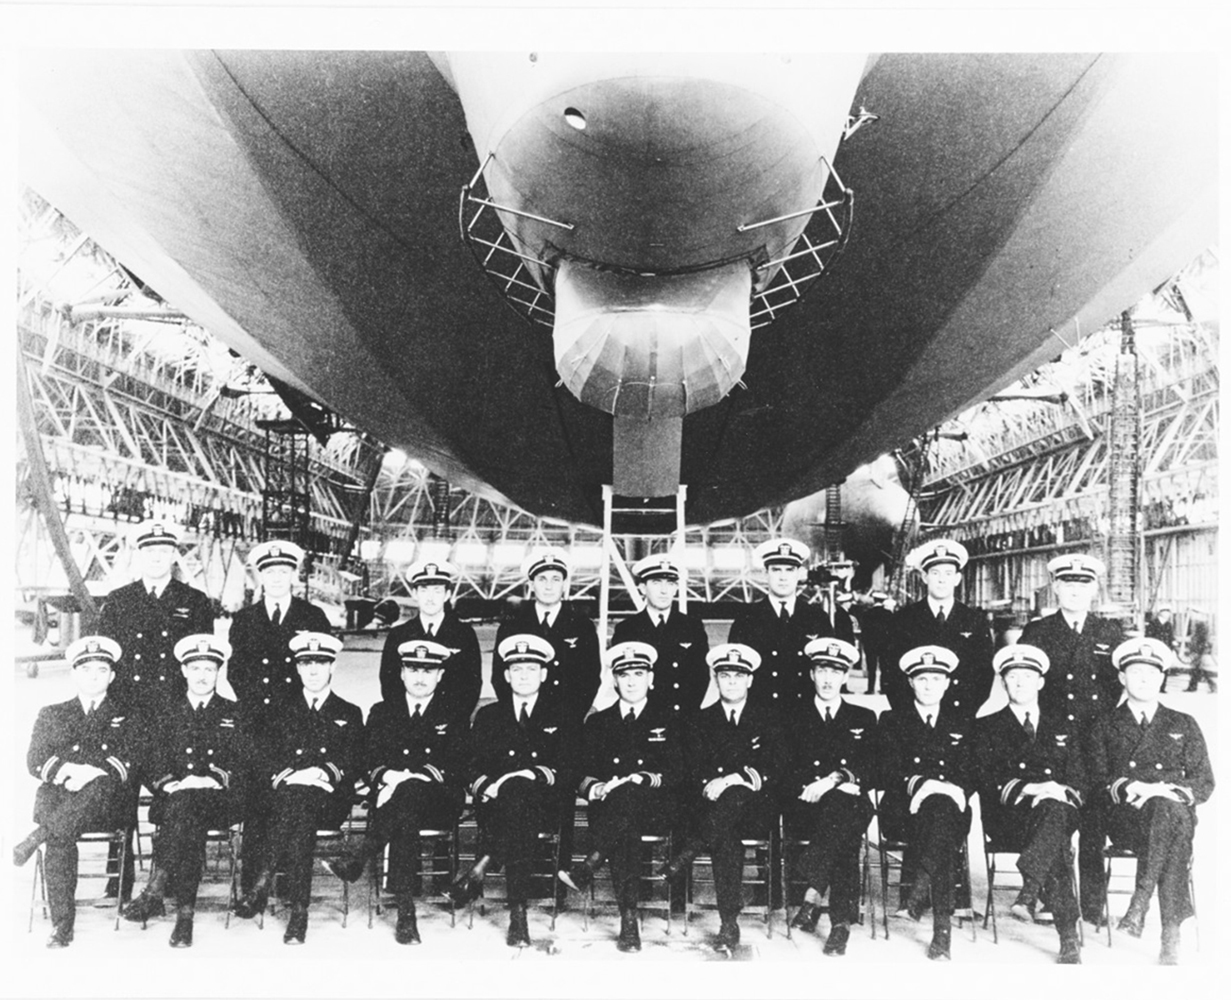 19 Navy officers wearing dark formal uniforms and white hats pose in 2 rows under the USS Macon dirigible moored inside Hangar 1.